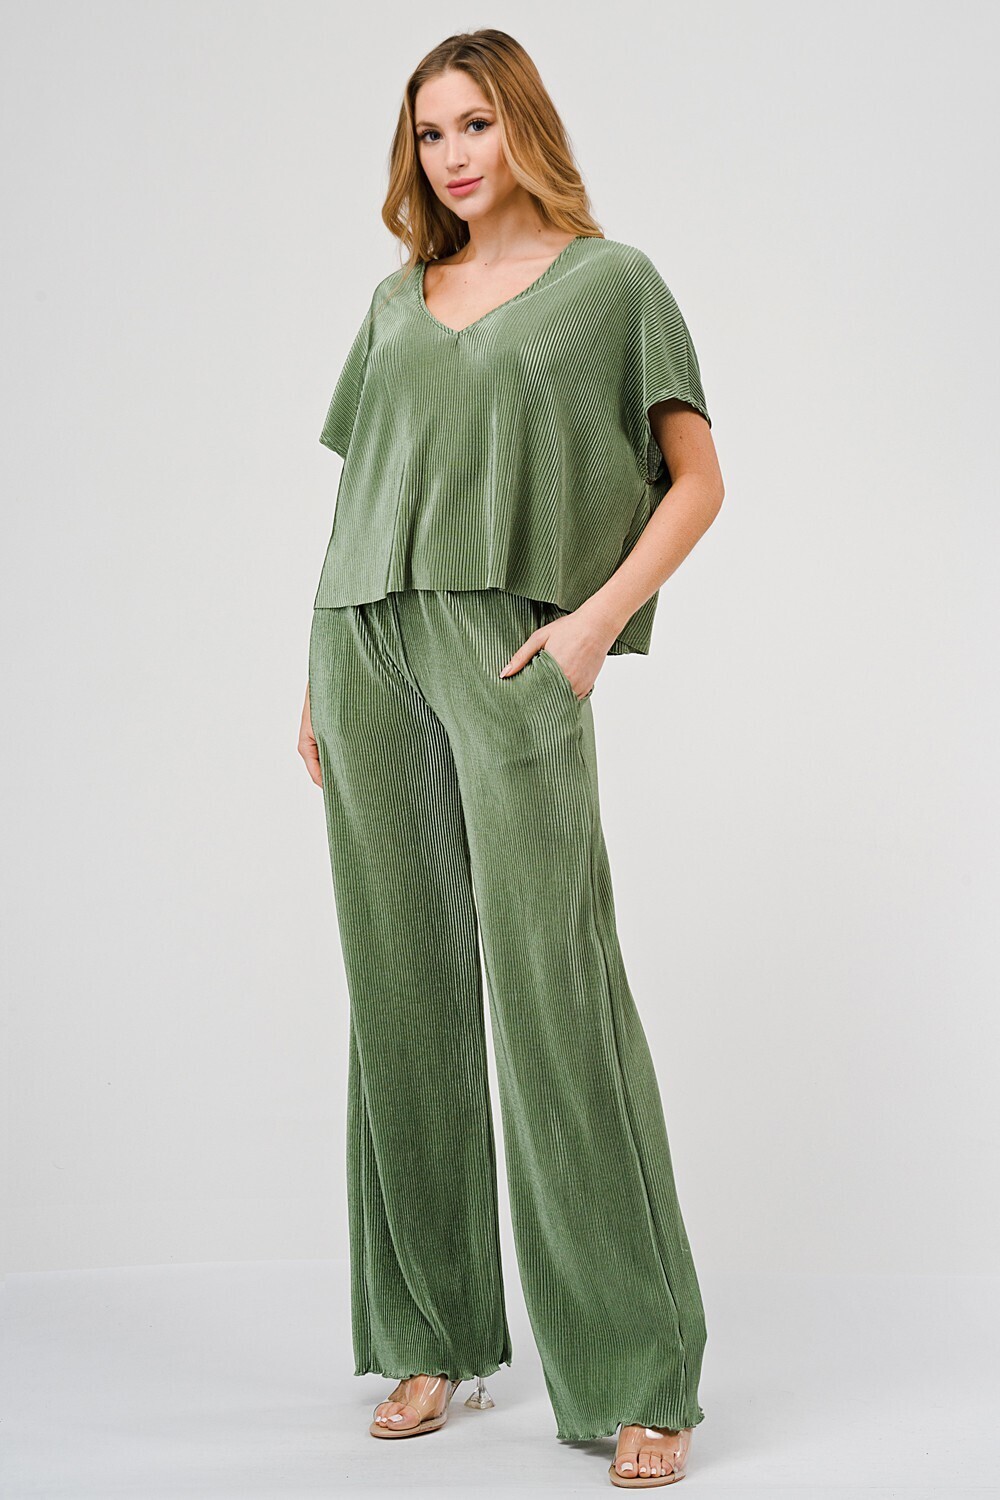 Sage Bodre Relaxed Top